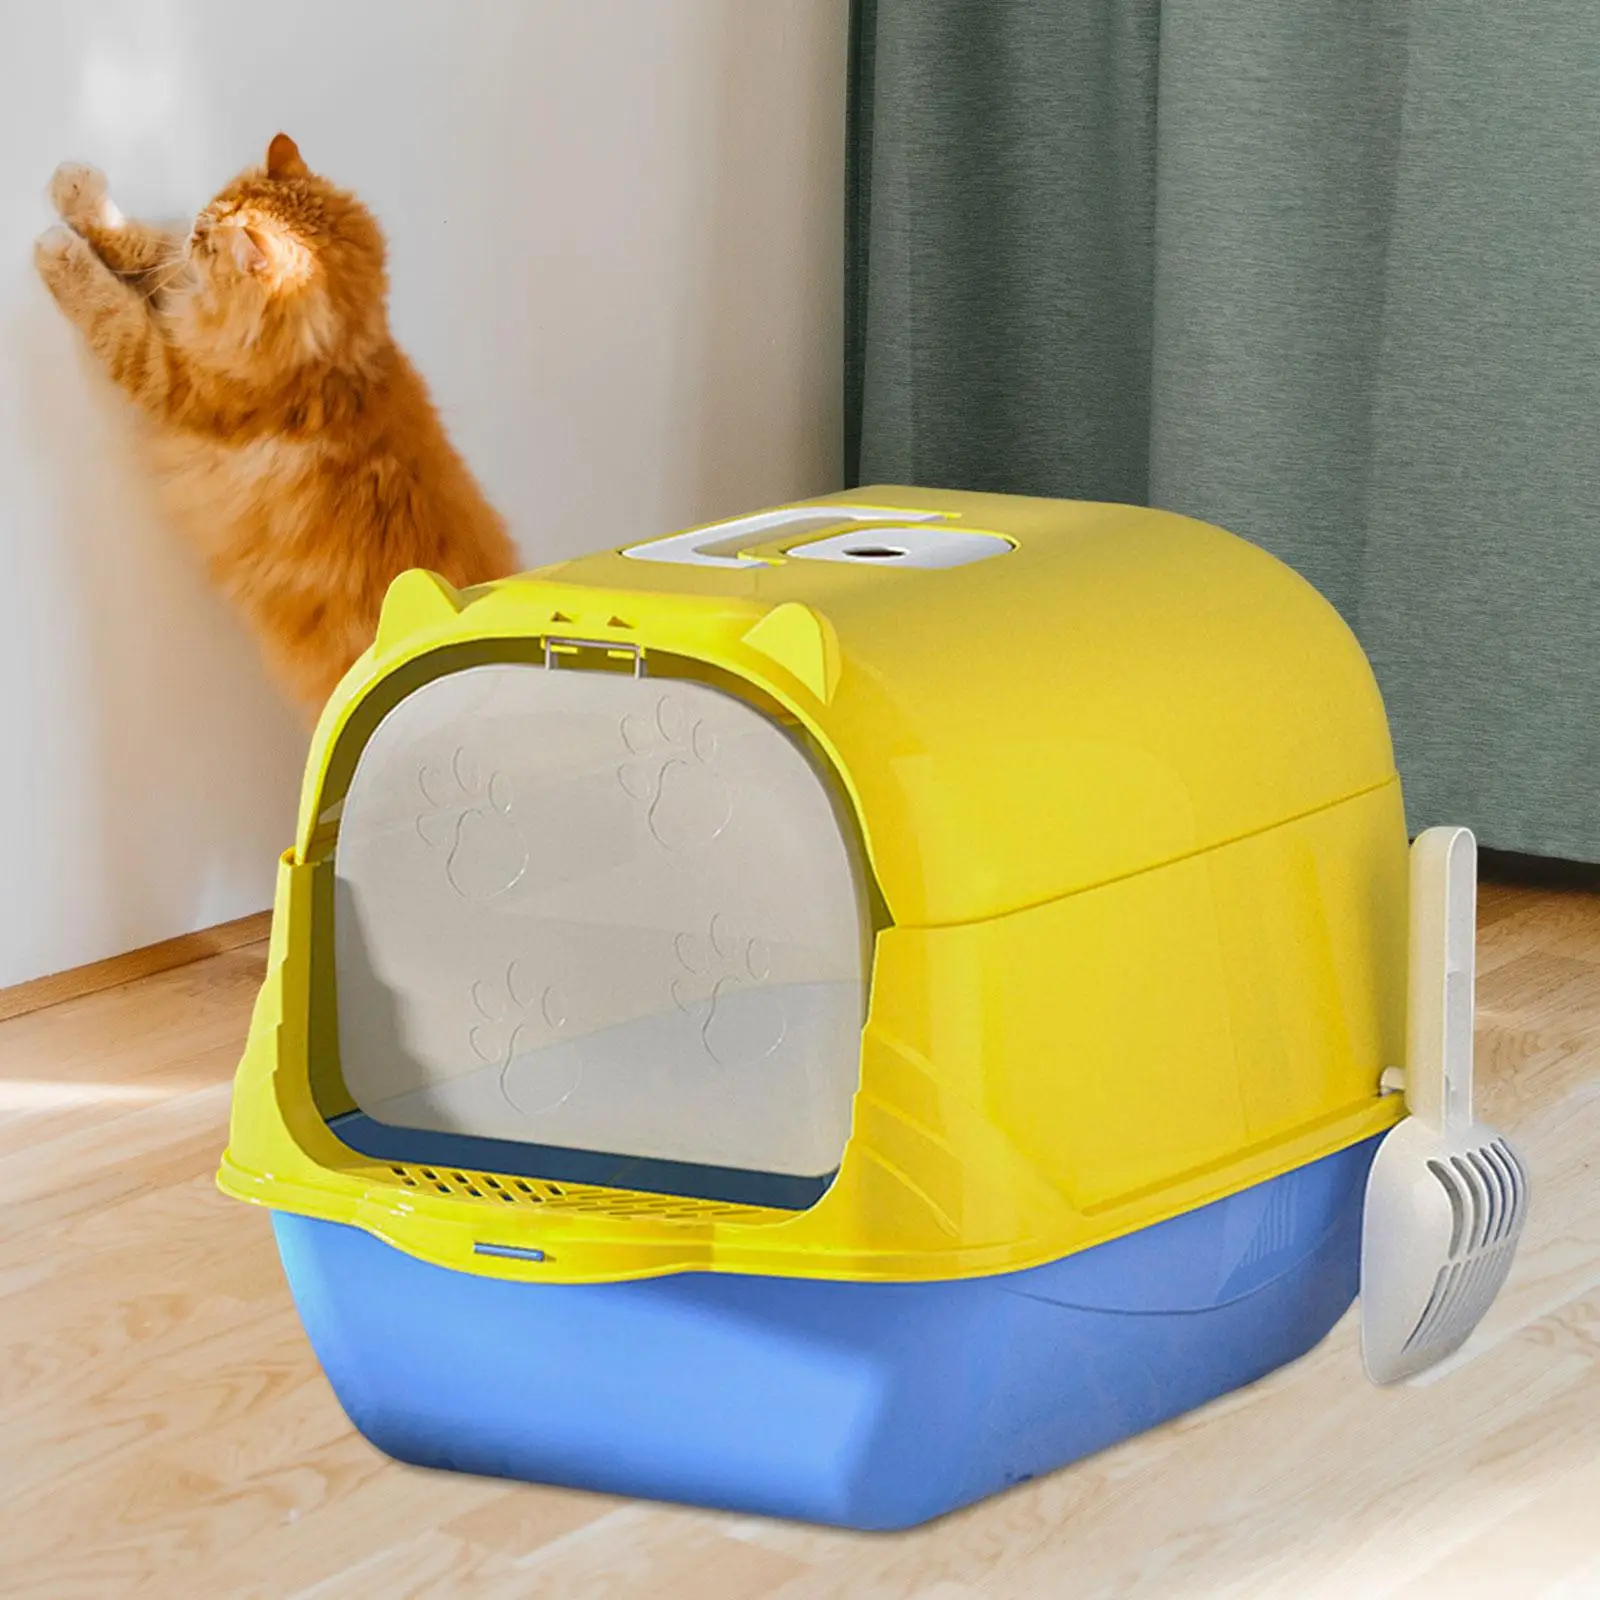 Hooded Cat Litter Box Durable Deep Loo with Scoop Two Way Movable Door Kitty Litter Tray Portable Enclosed Cat Toilet